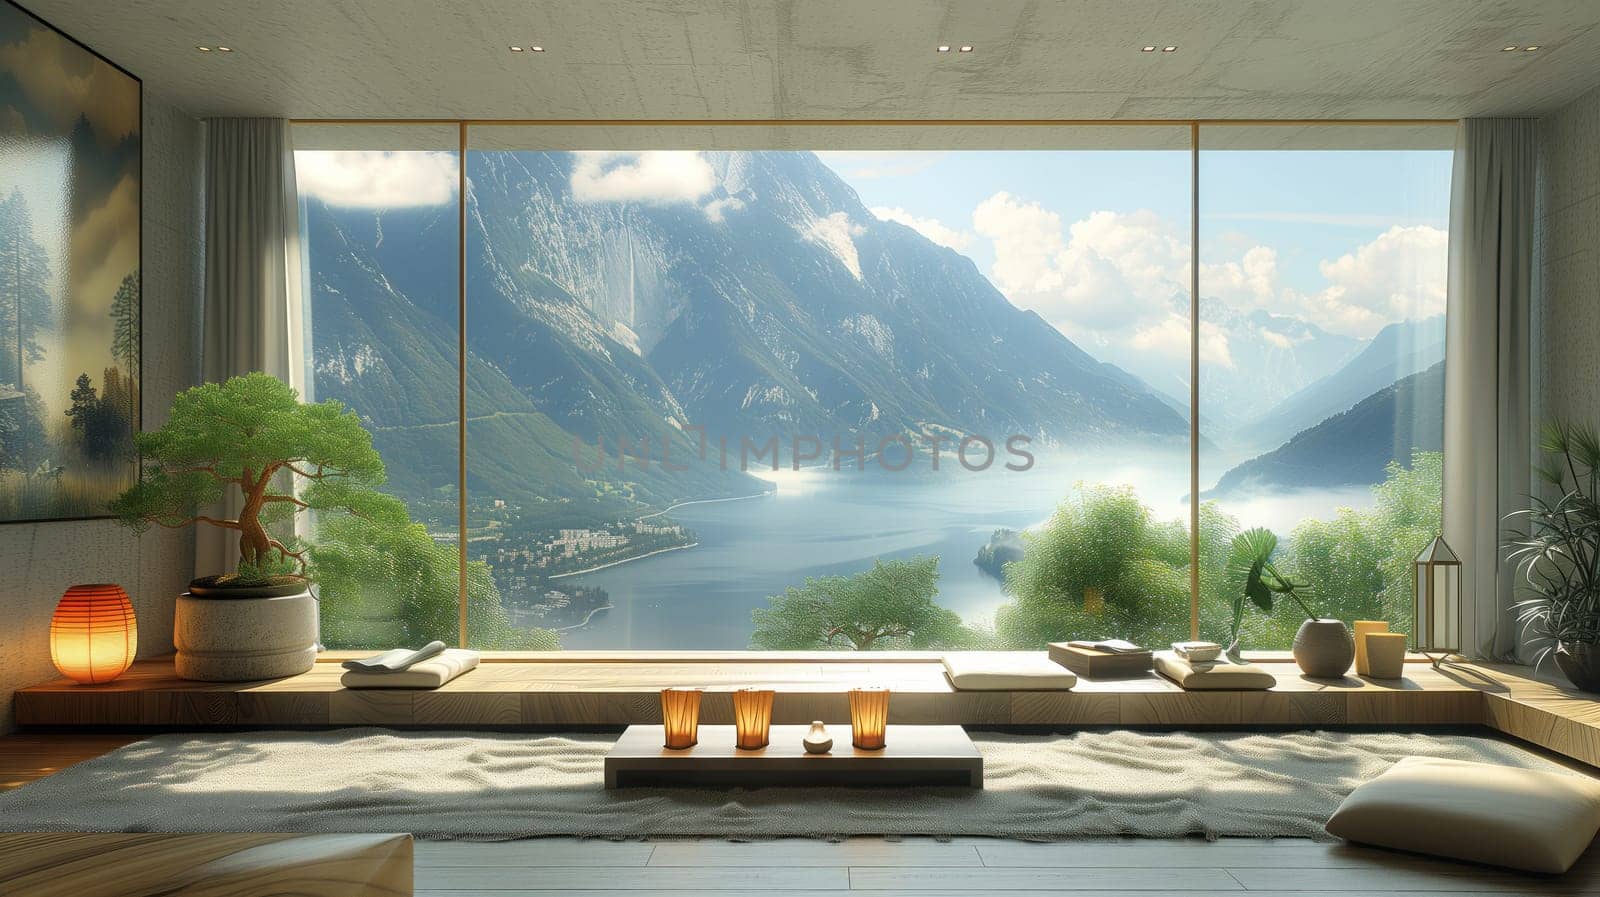 House with a big window showing view of lake, mountains, and clouds by richwolf